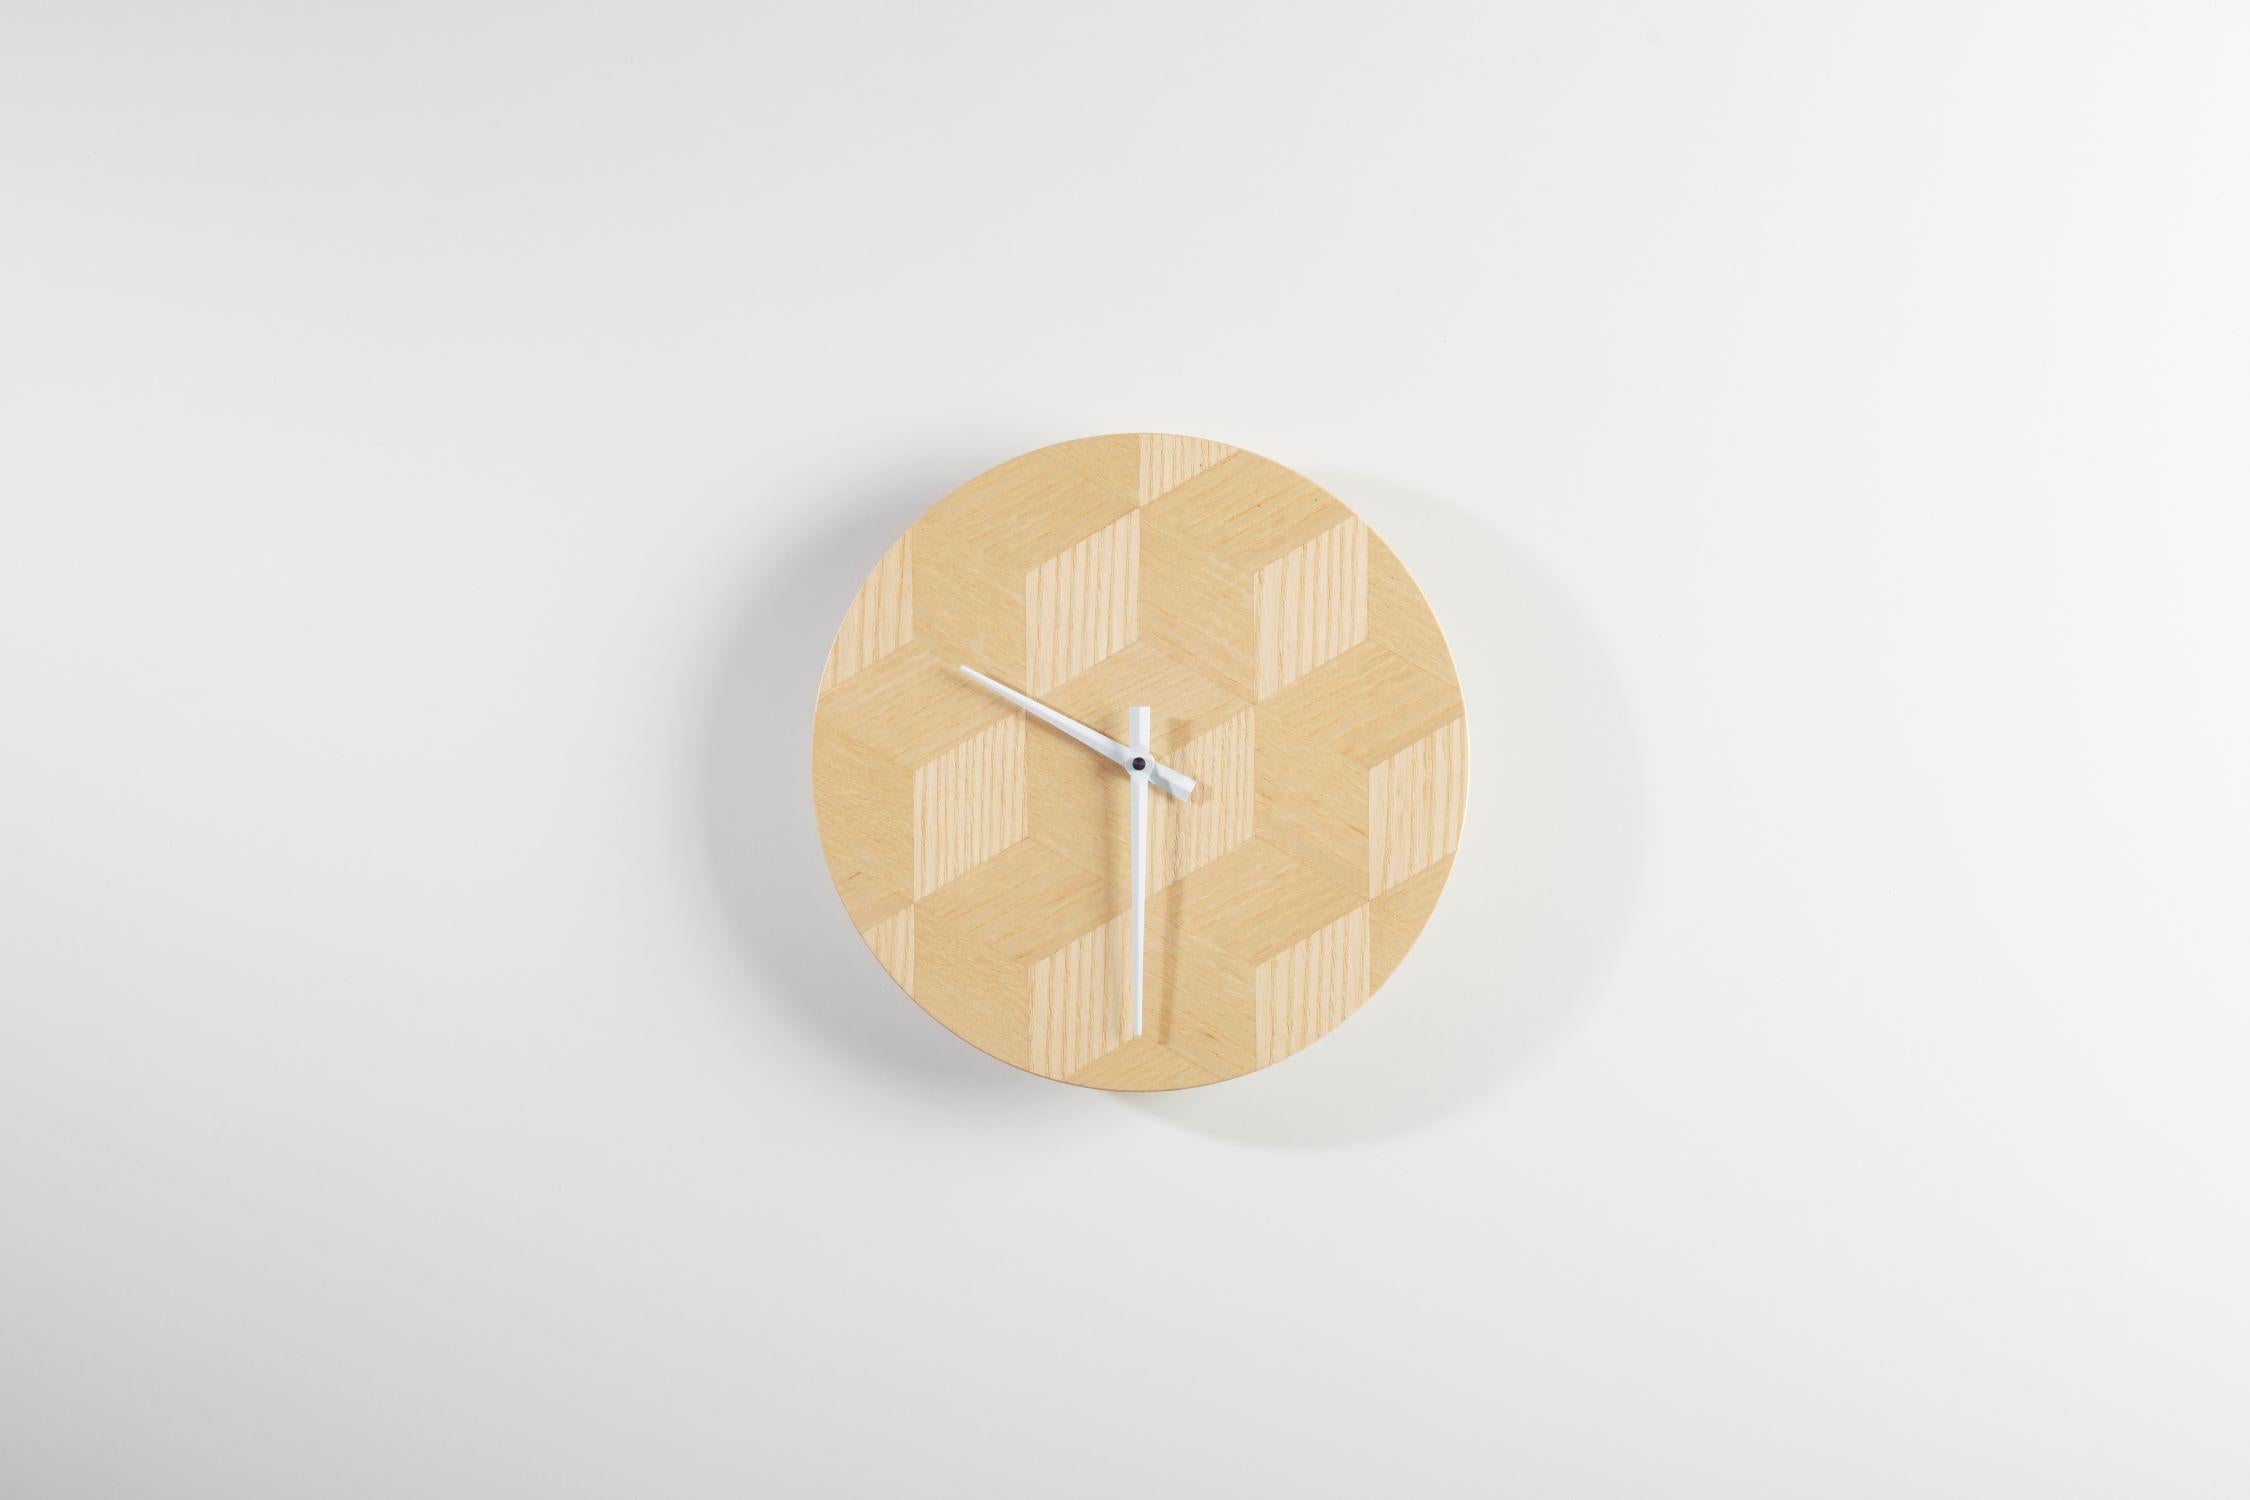 Redefine your decor with these exquisite wall clocks, showcasing a mesmerizing design crafted from natural ash veneer arranged in a 3D cube pattern. The intricate arrangement of the ash veneer creates a captivating visual effect, resembling shifting